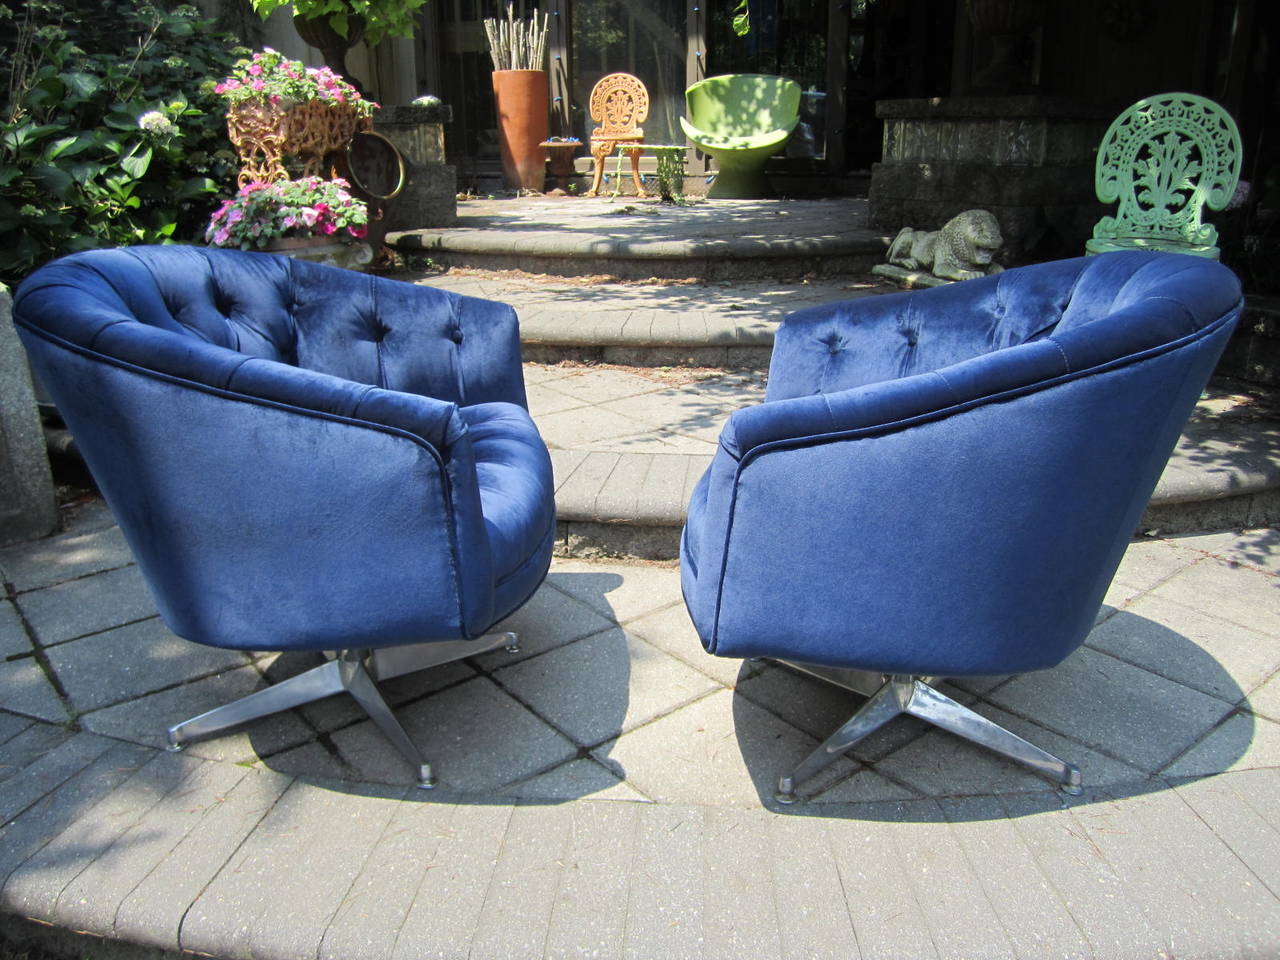 Simply scrumptious pair of swivel rocker club chairs in the style of Ward Bennett. These have brand new navy blue high end velvet upholstery and look amazing. The bases are polished aluminium and have a mellow aged patina. You will love everything